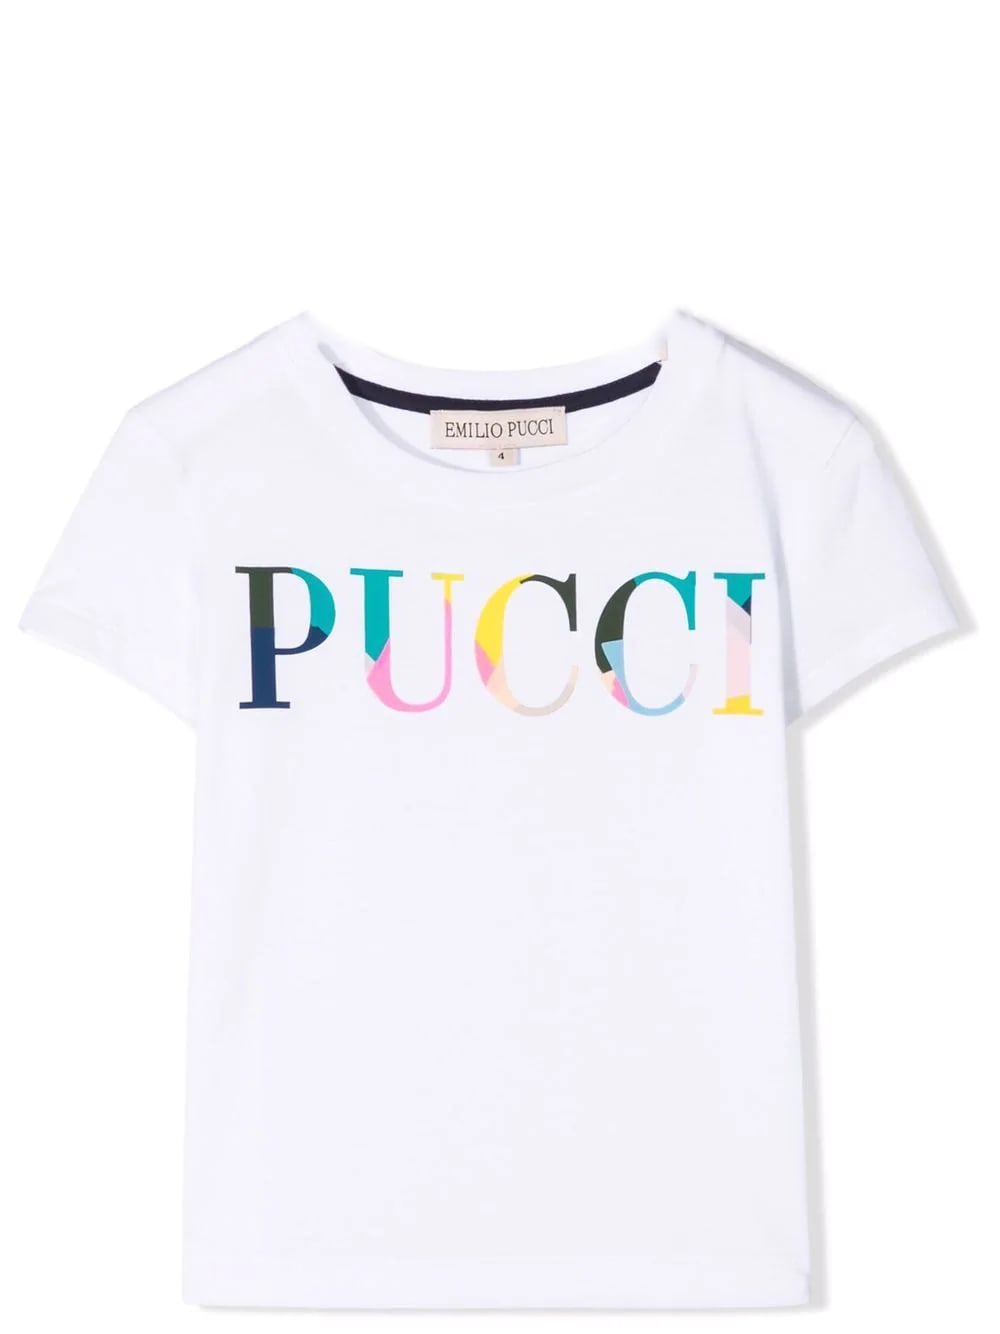 Emilio Pucci White T-shirt With Print